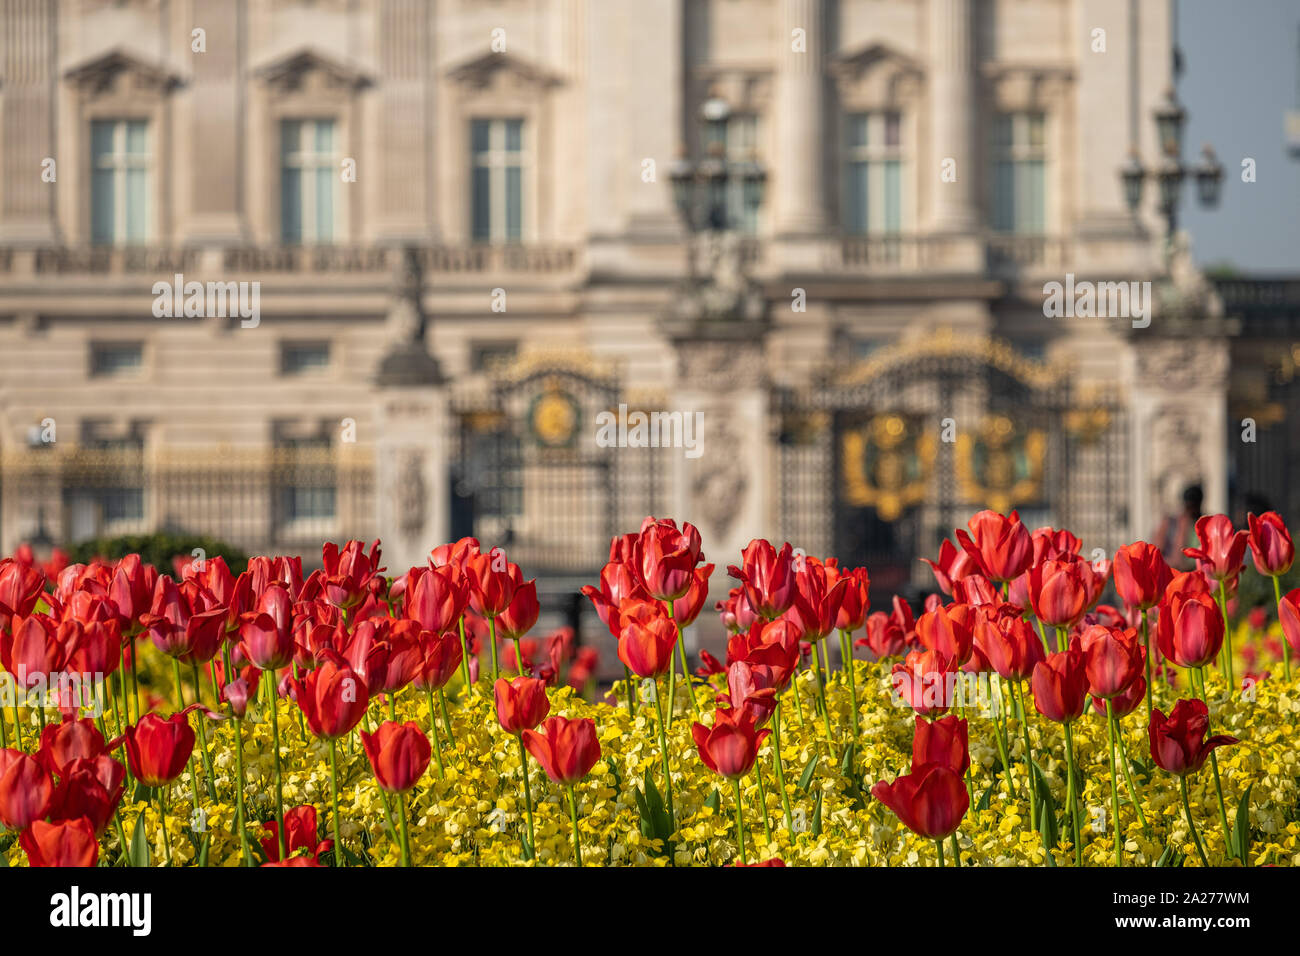 Telephoto shot of flowers in front of Buckingham Palace, London. The base of the Victoria Memorial and Palace are defocused in the background Stock Photo